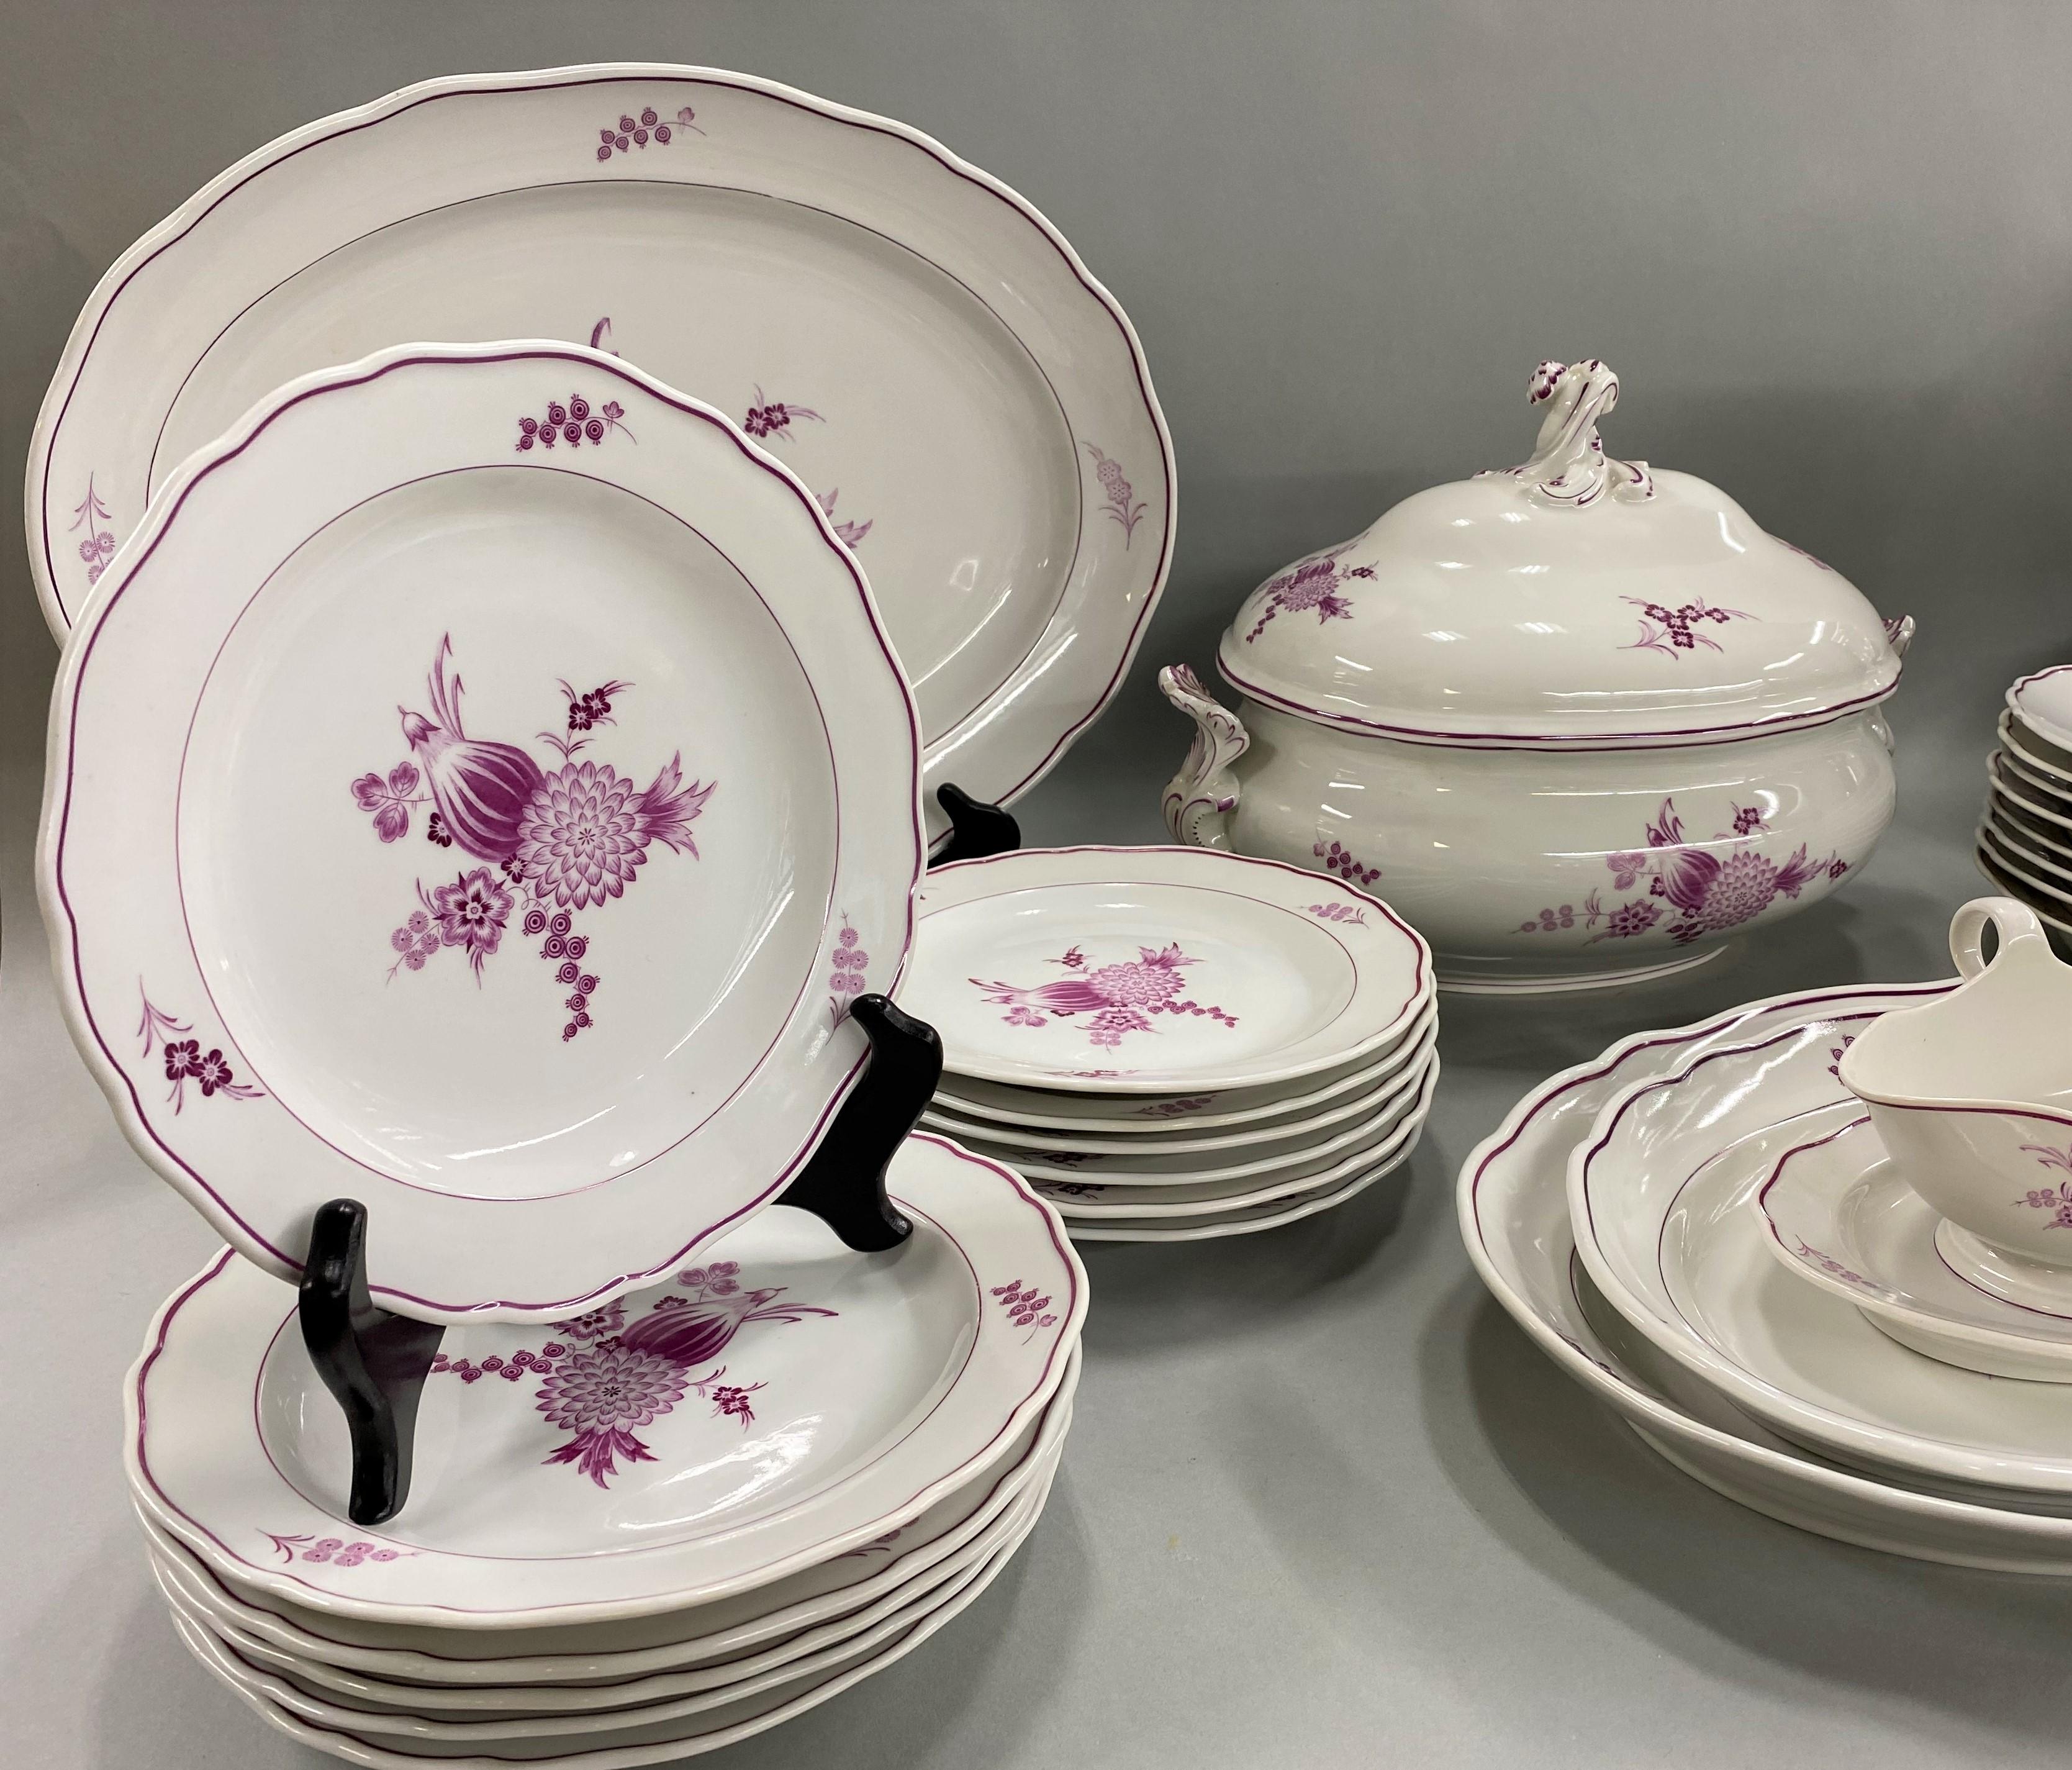 A fine 49-piece Meissen porcelain dinner service in a rare purple/puce color, including 10 10-inch dinner plates, 12 9-inch luncheon plates, 12 6.25-inch bread plates, 9 soup bowls (2 inch height x 9.5-inch diameter), 1 oval serving dish (14-inch x